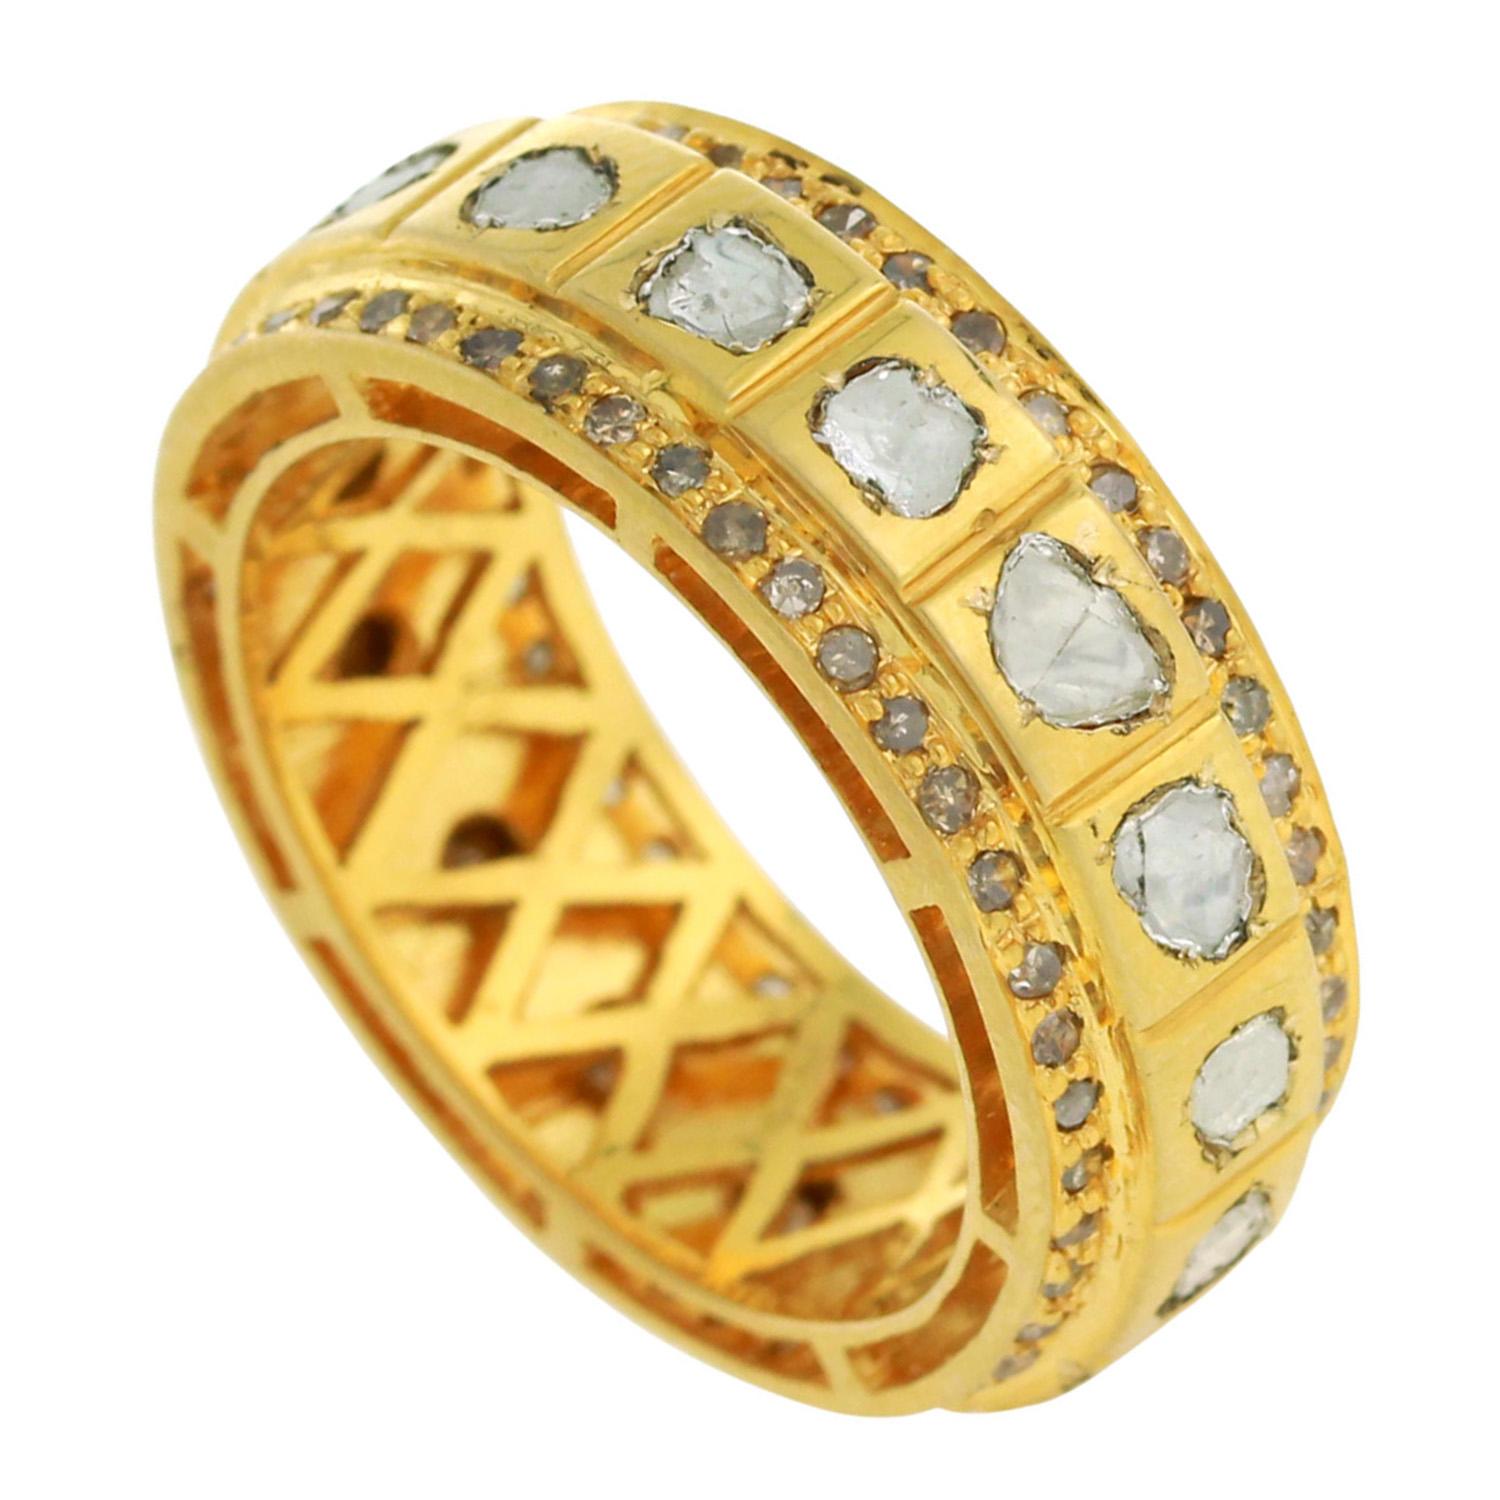 Early Victorian Rosecut Diamond Band Ring With Filigree Work On Interior Made In 18k Yellow Gold For Sale